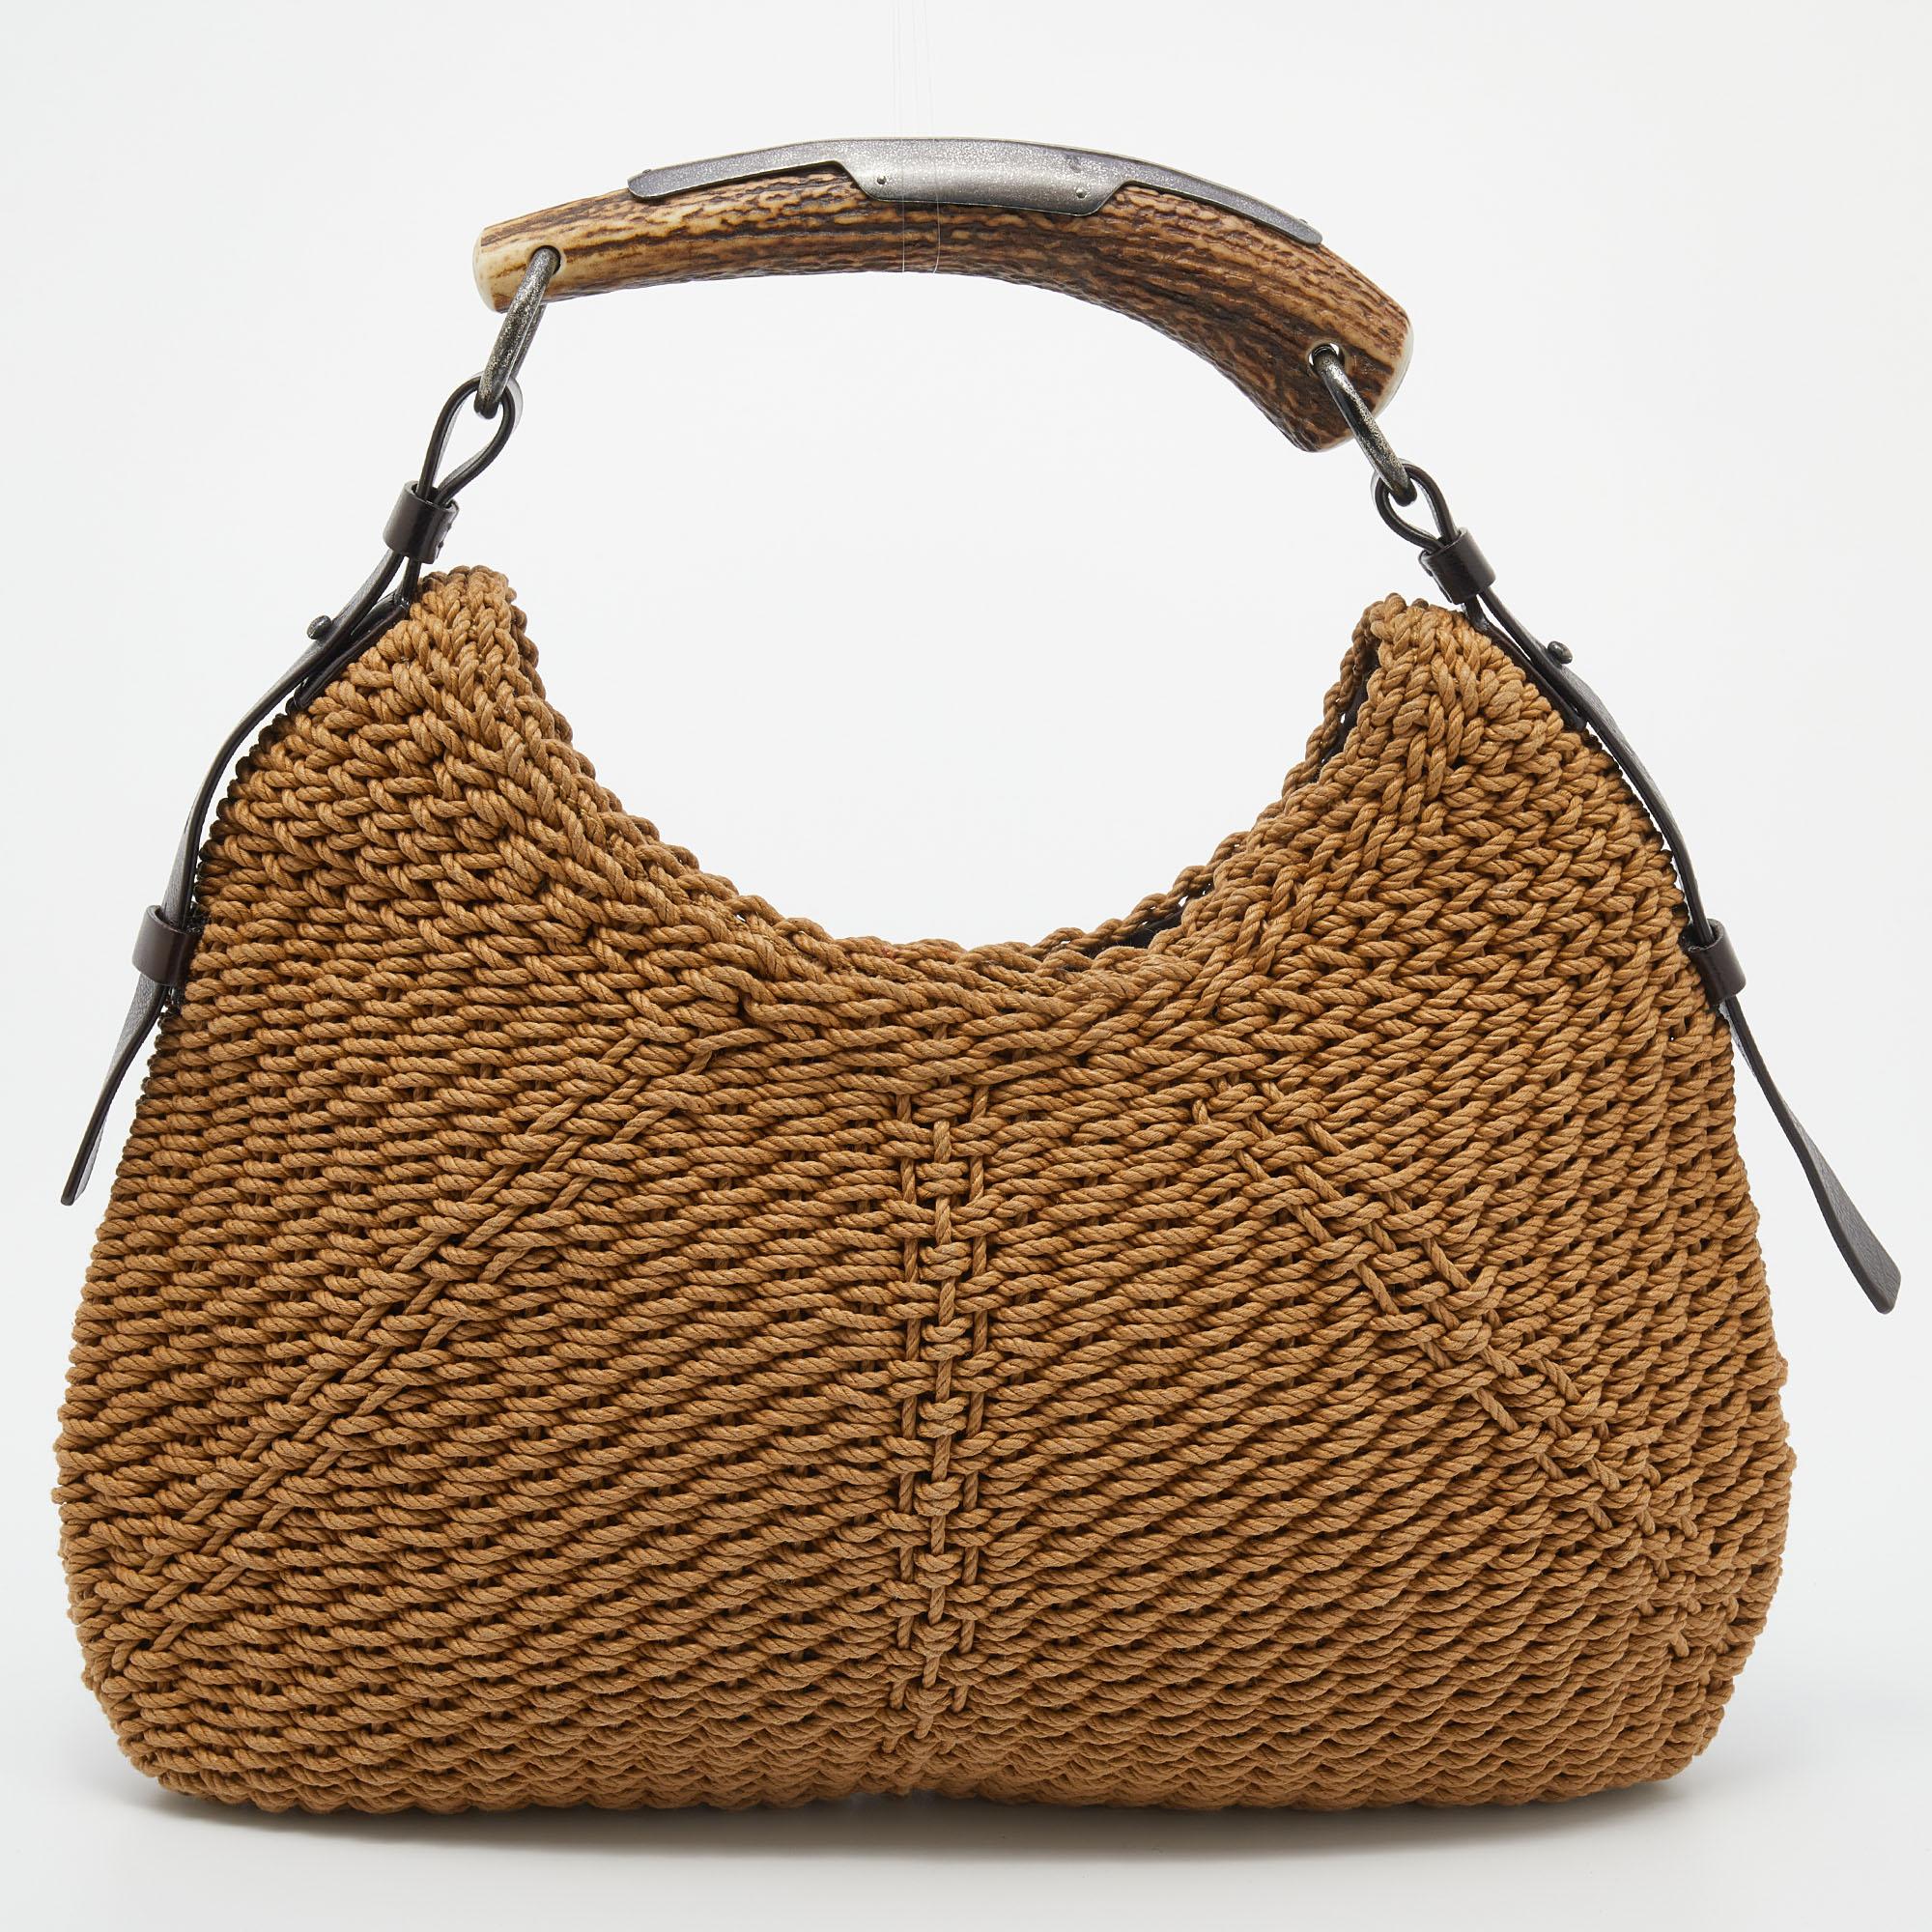 It is indeed rare for one to chance upon a hobo as gorgeous as this Mombasa from Yves Saint Laurent. It comes beautifully crafted from raffia and is designed with a horn-shaped handle detailed with silver-tone hardware. The bag also has a